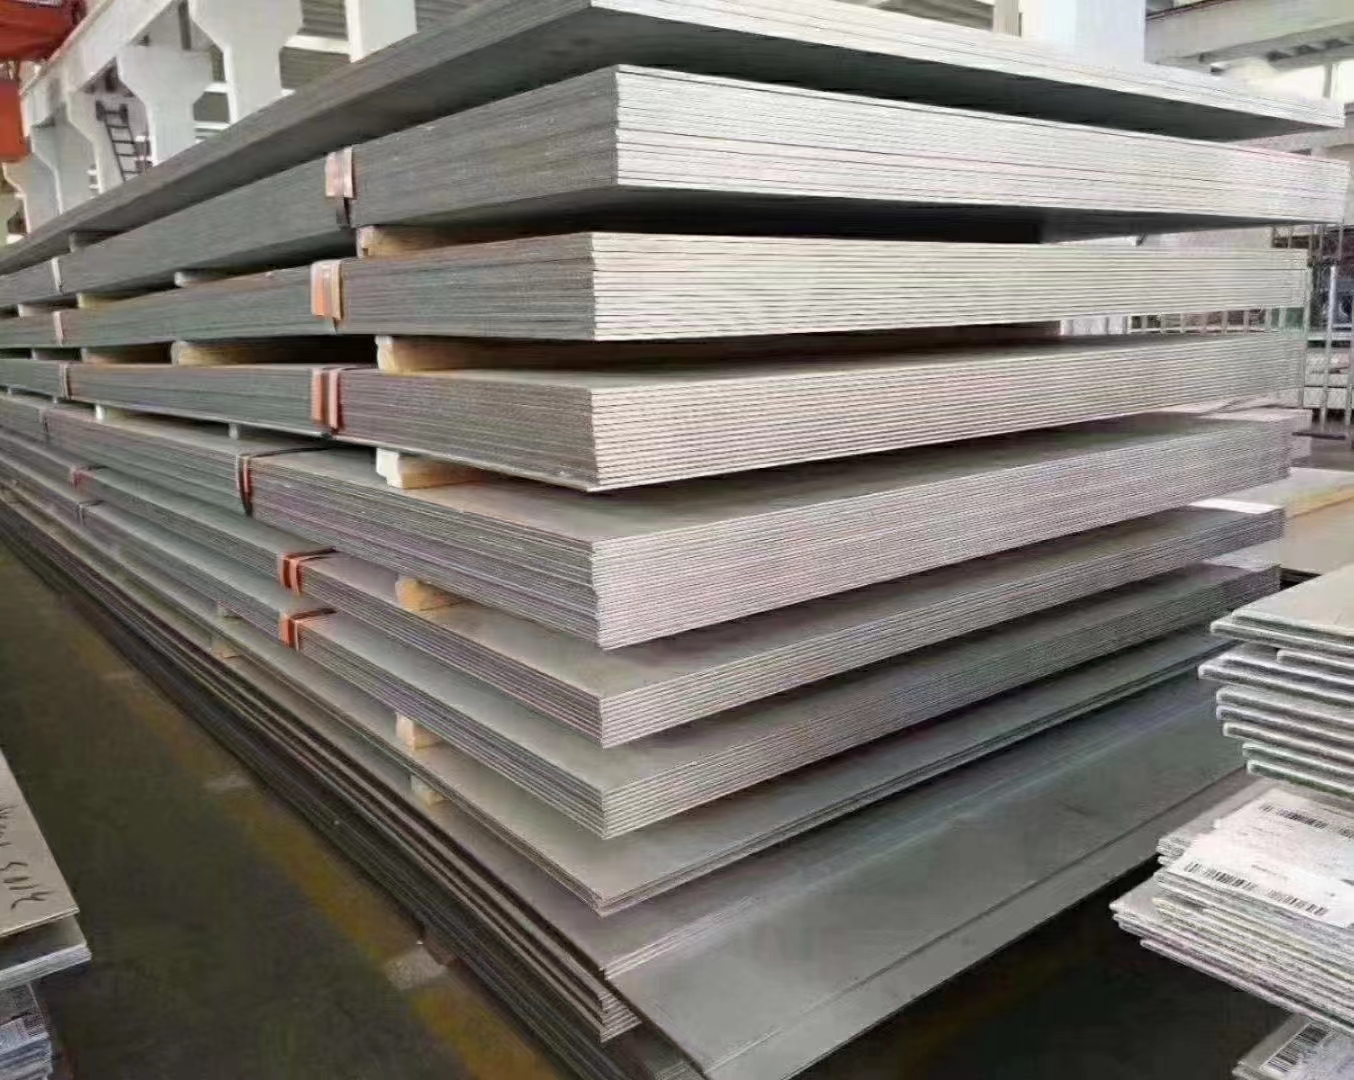 Duplex Steel Plate Stainless Steel Sheet with Best Price And Export Quality Product From China Manufacturer